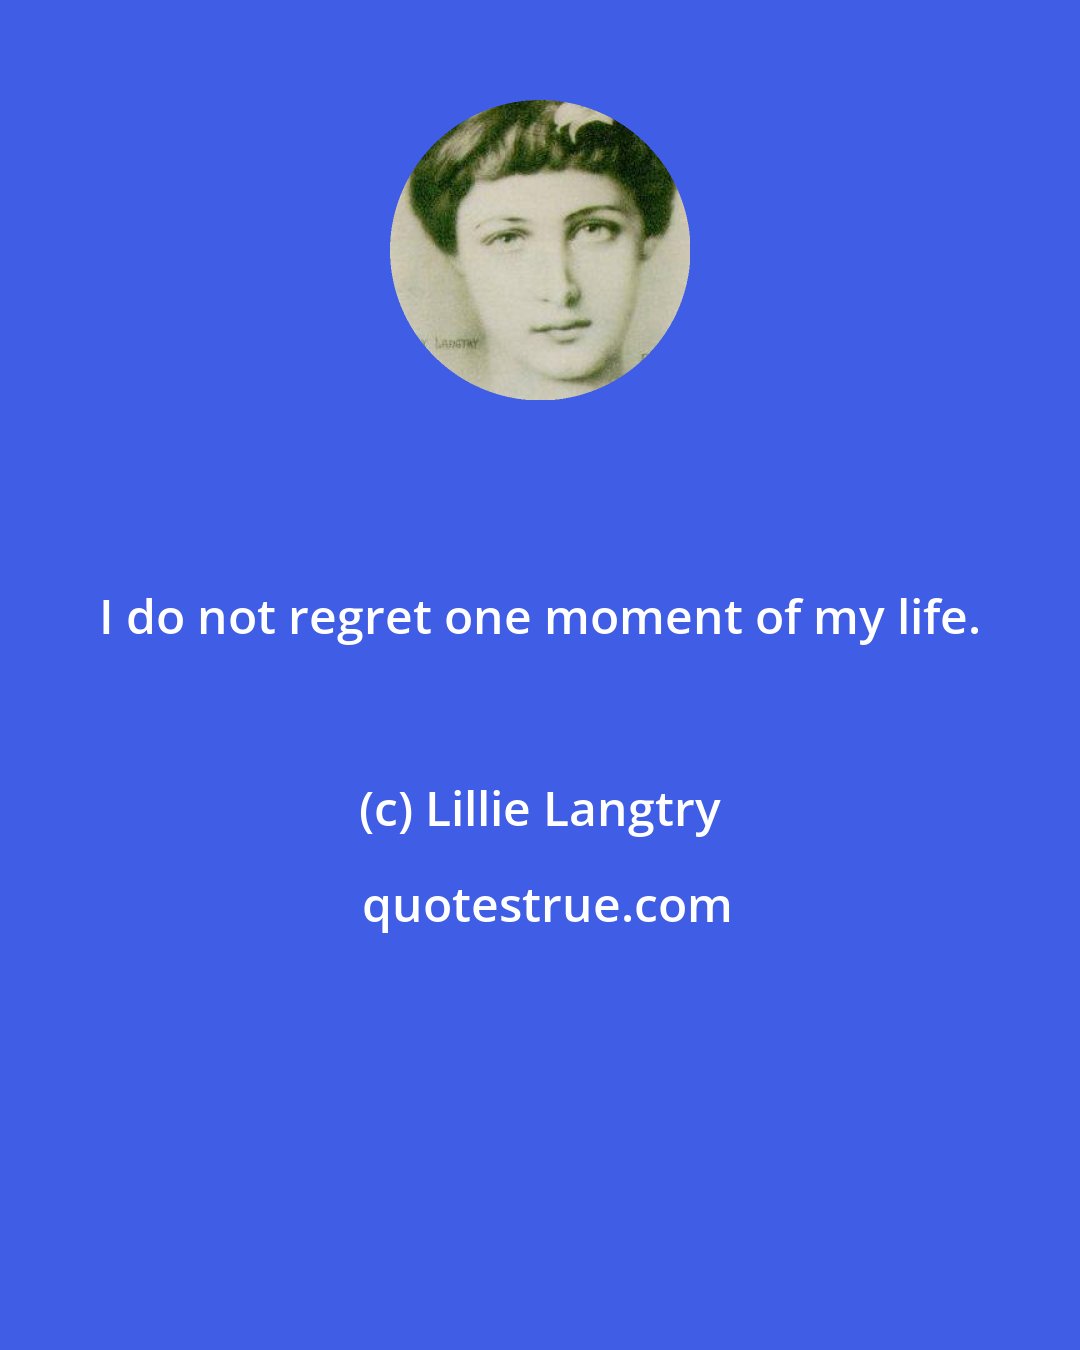 Lillie Langtry: I do not regret one moment of my life.